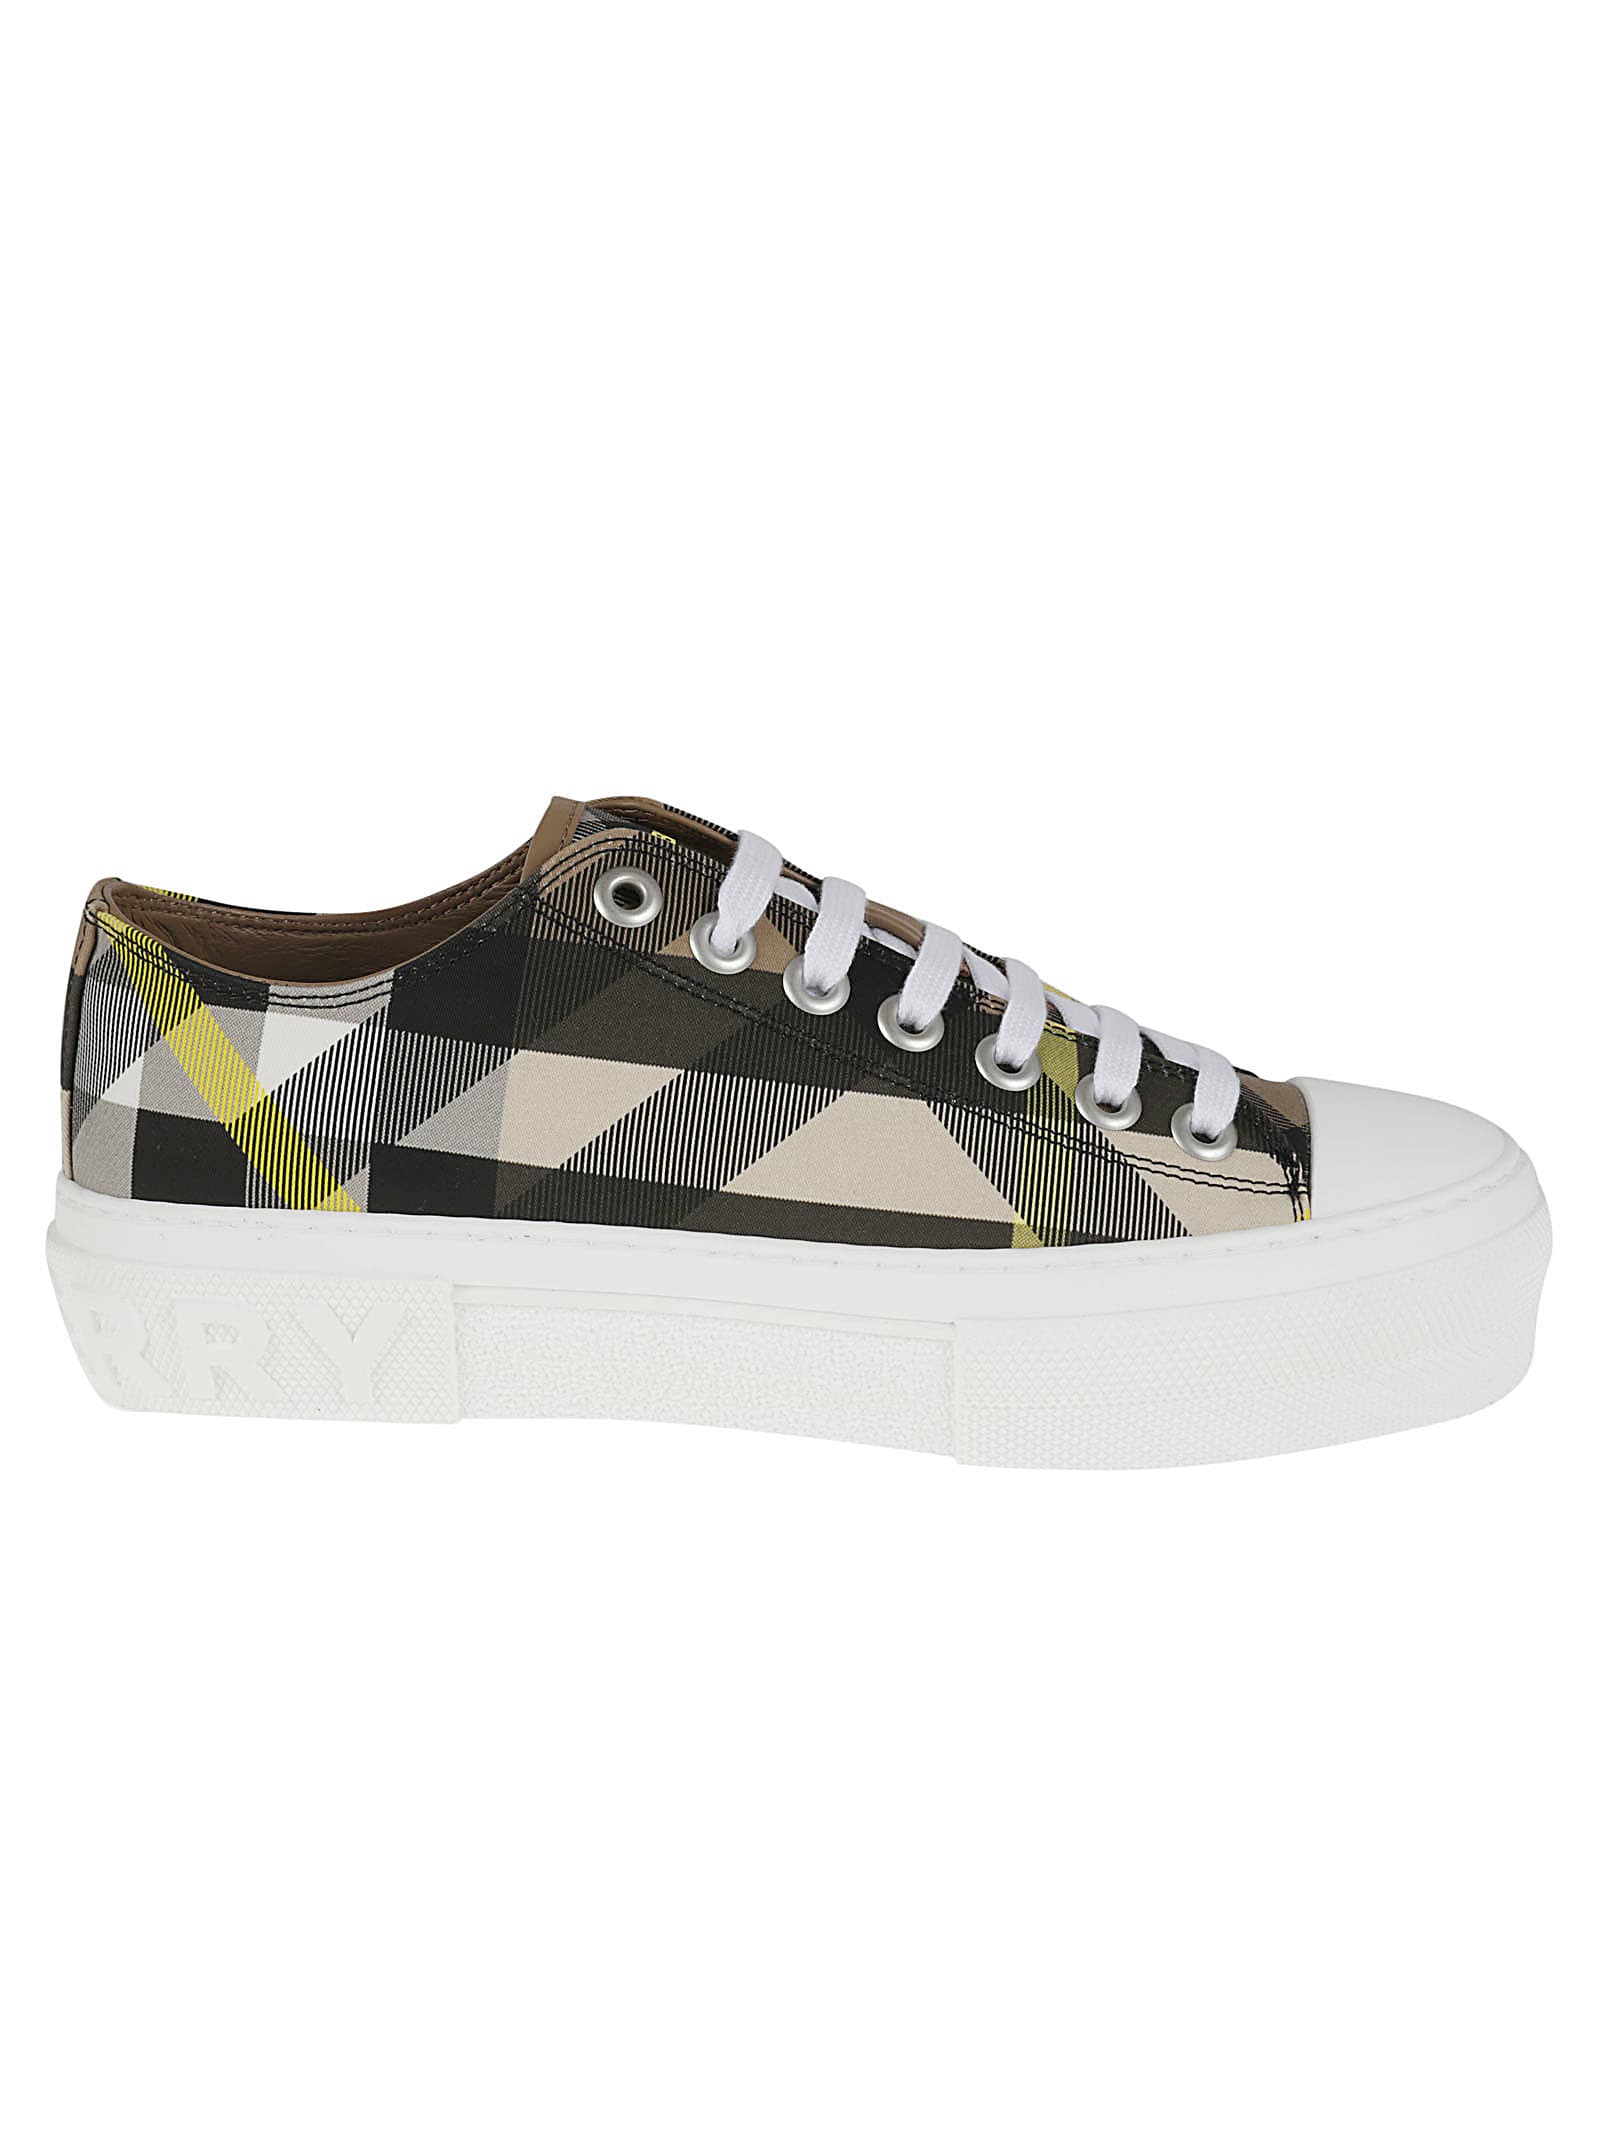 Burberry Check Low-top Sneakers